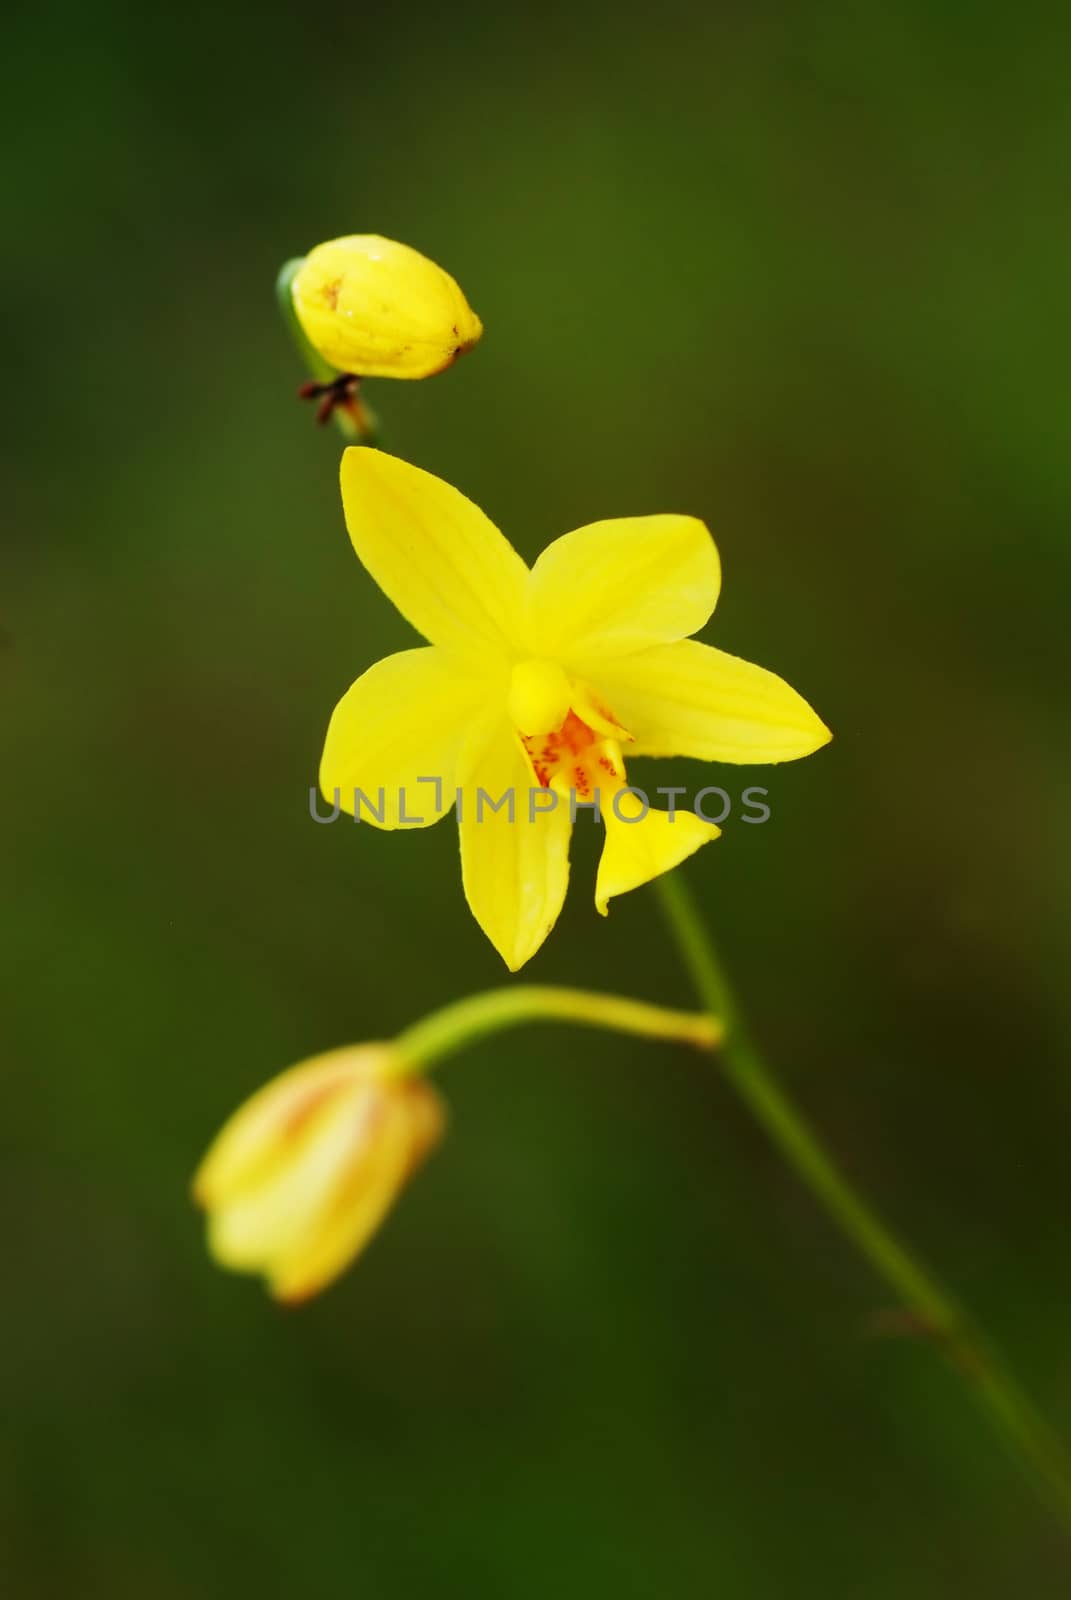 Soft focus Blooming yellow Similar Spathoglottis ground orchid flowers